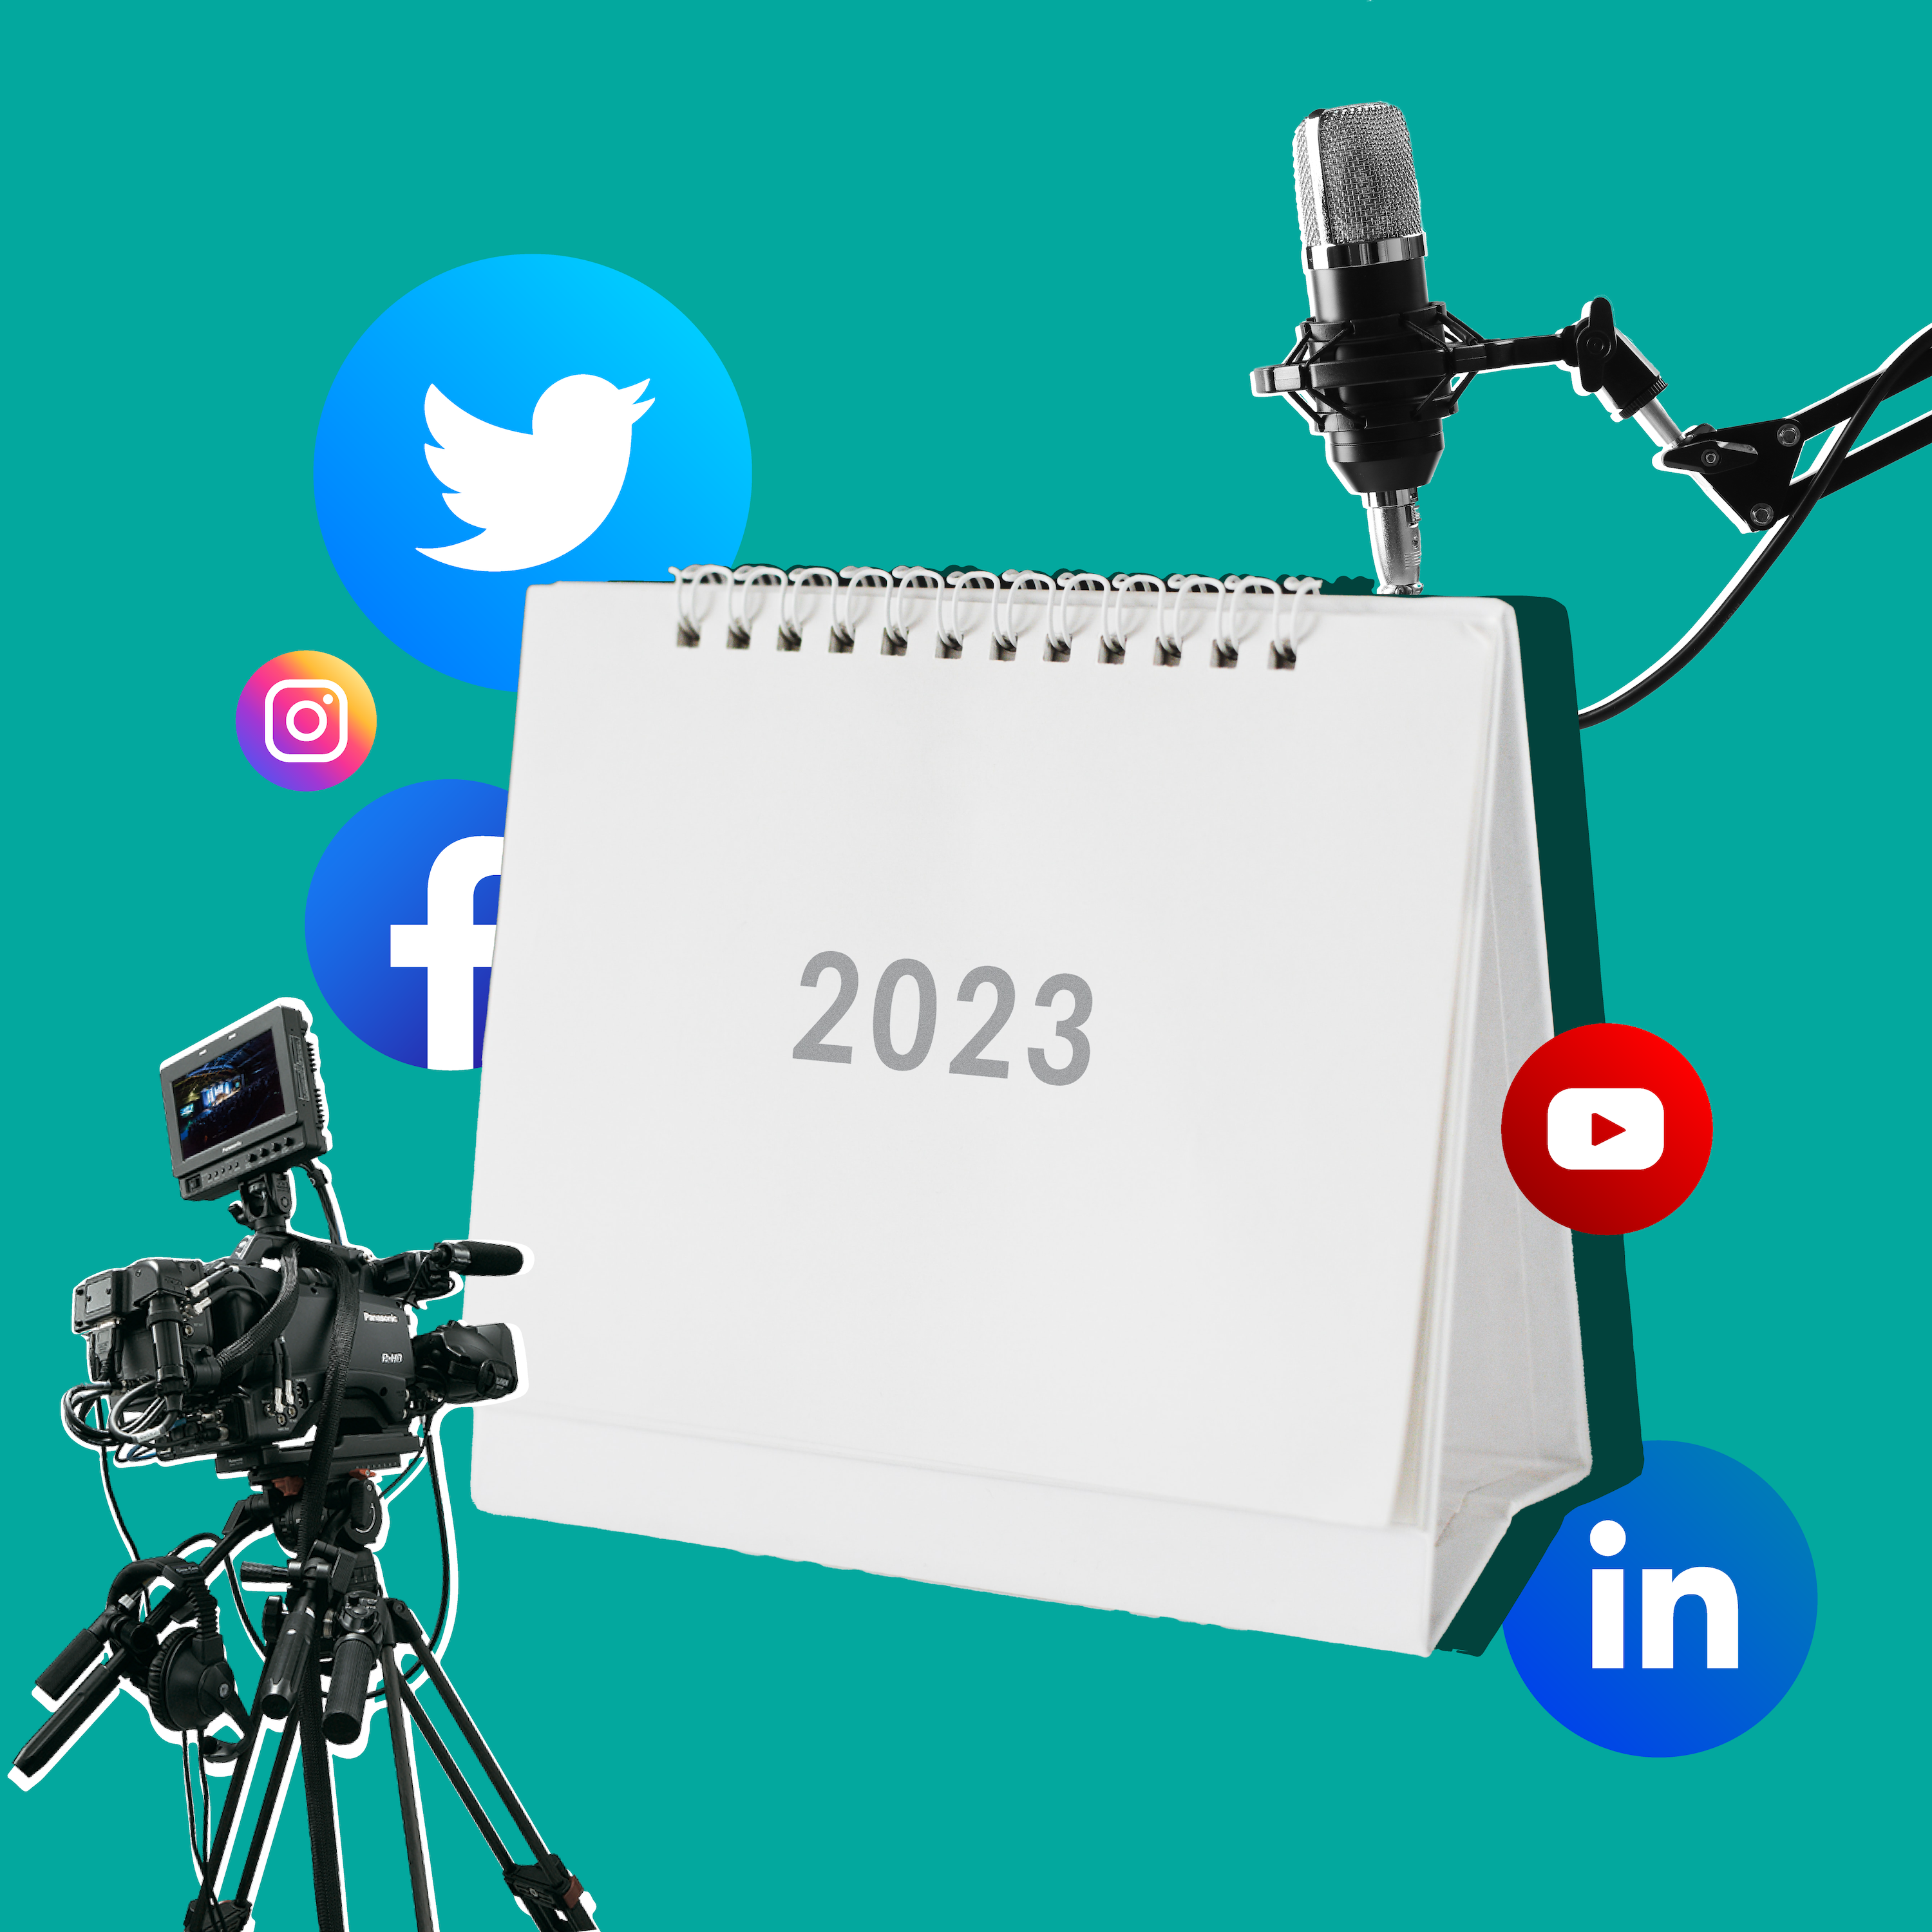 Kick-start Your Personal Brand in 2023